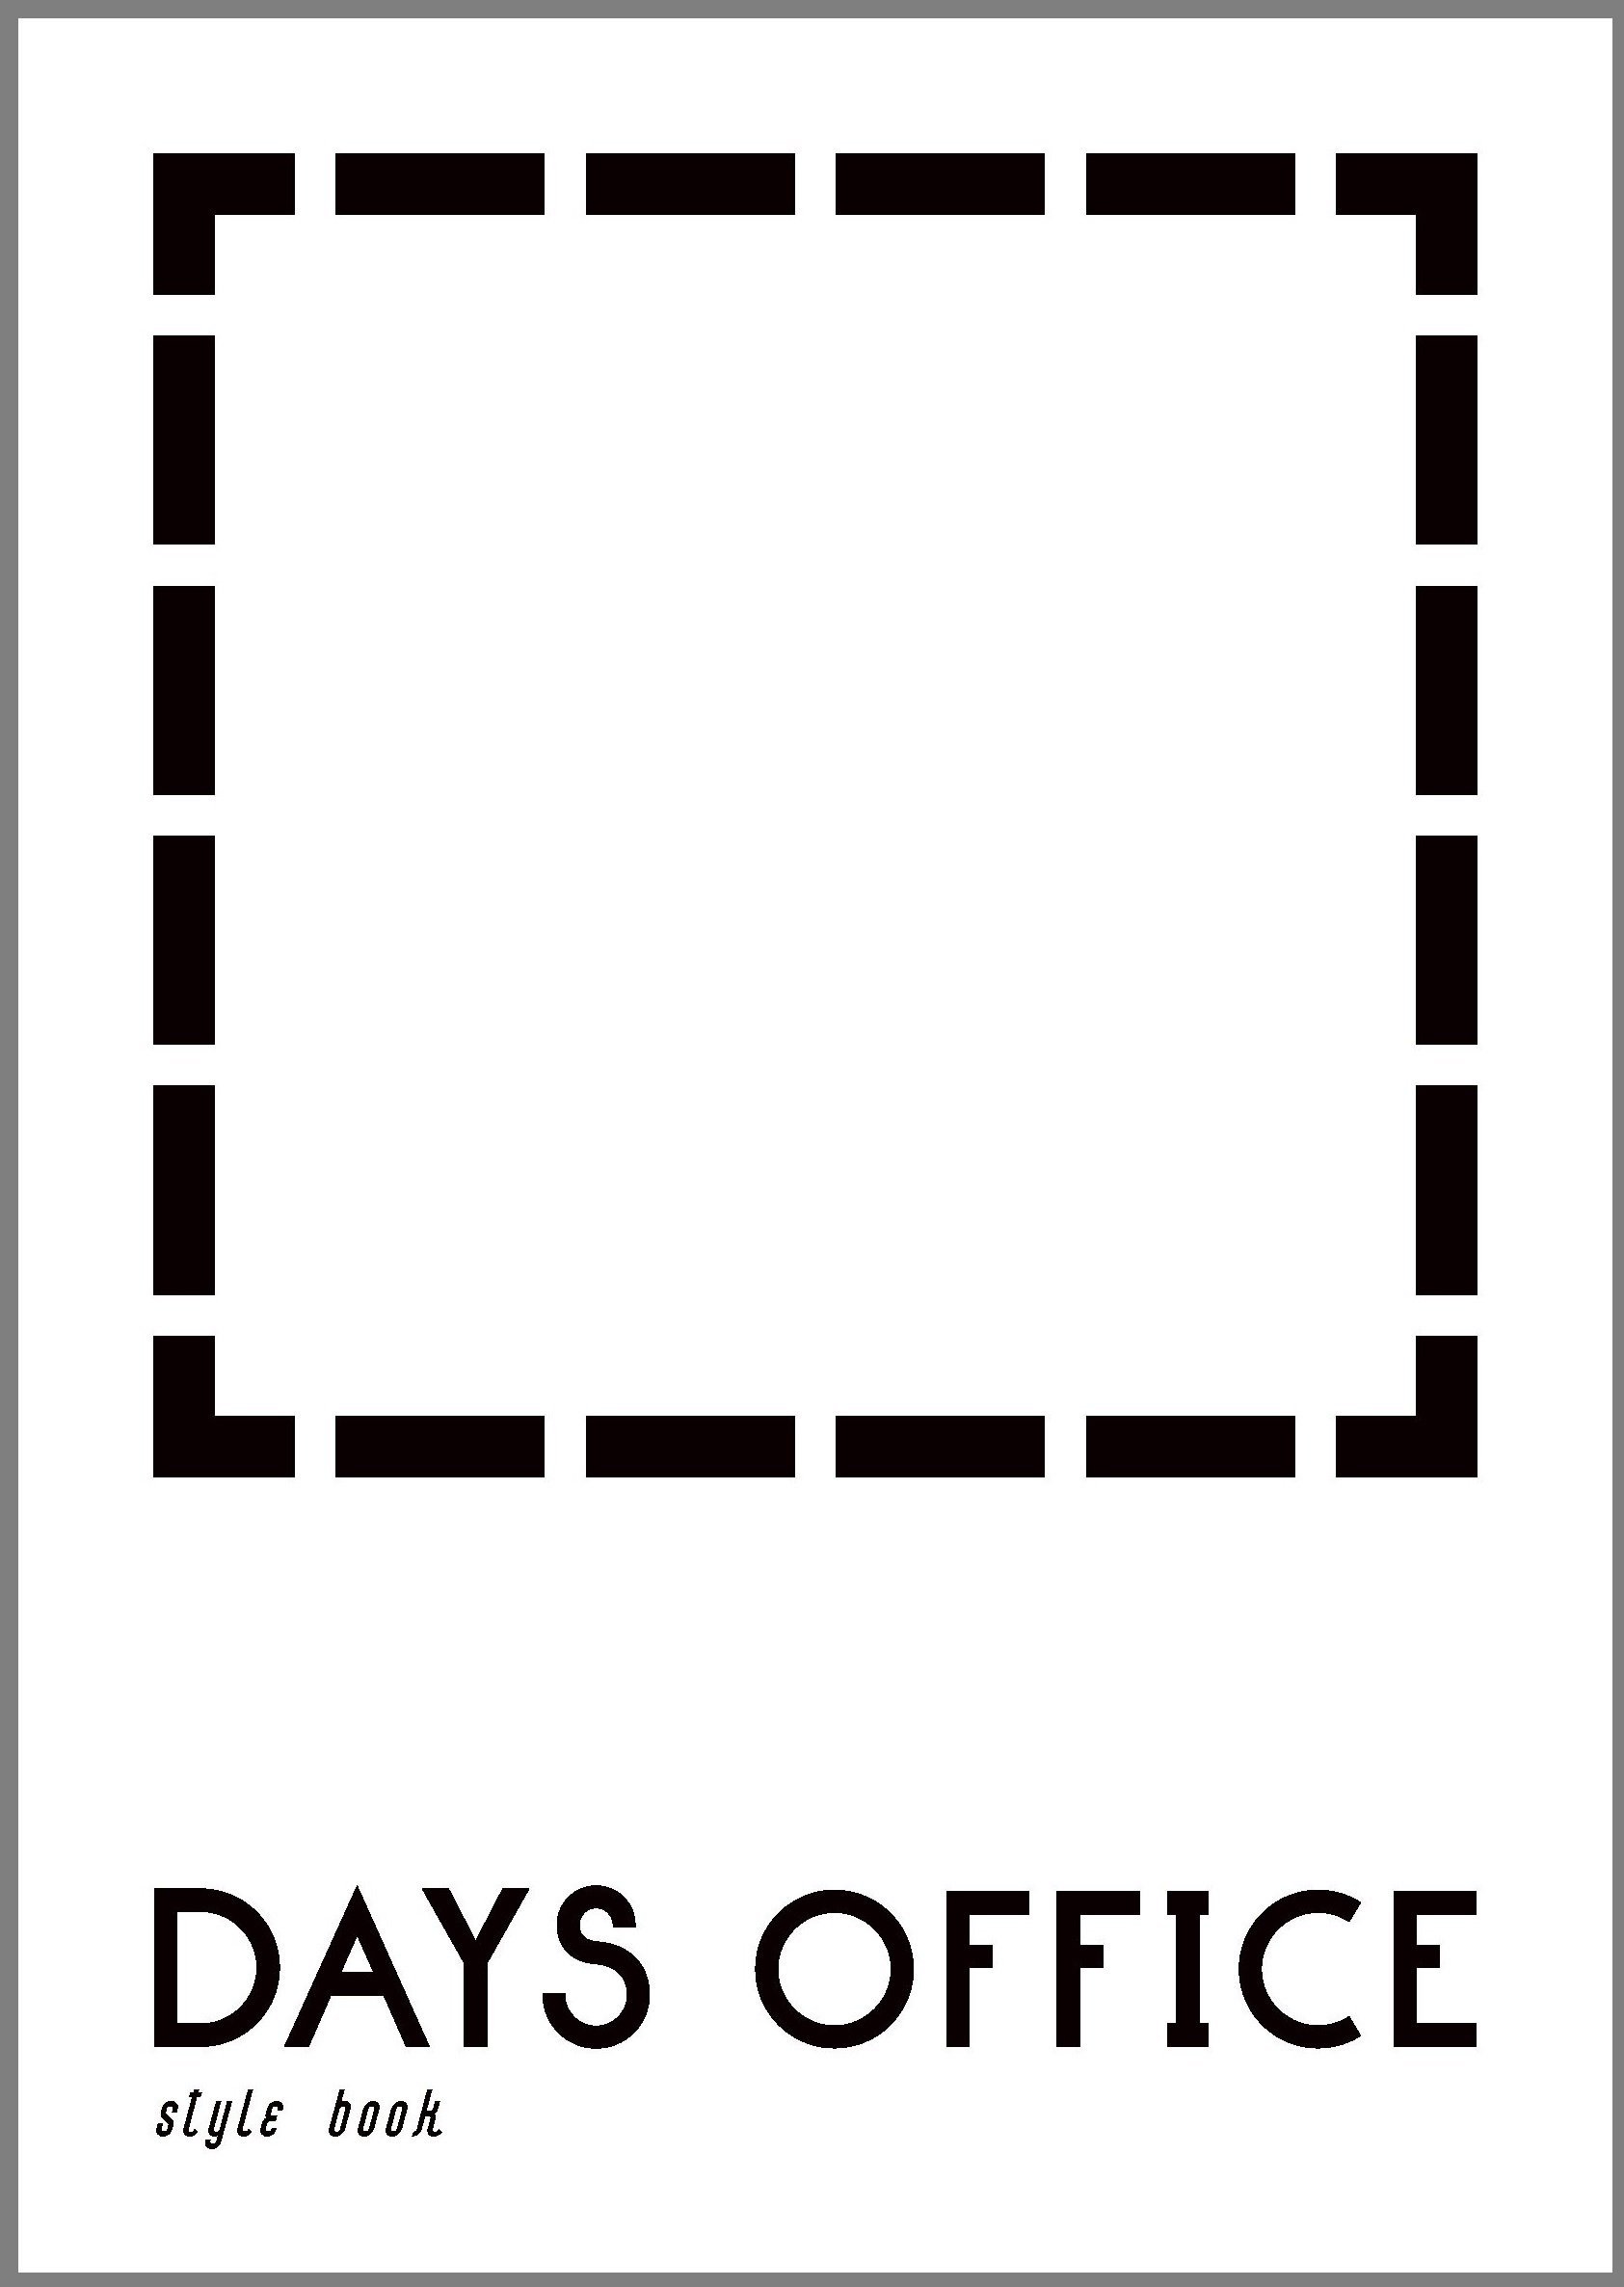 DAYS OFFICE STYLE BOOK Vol.6.2